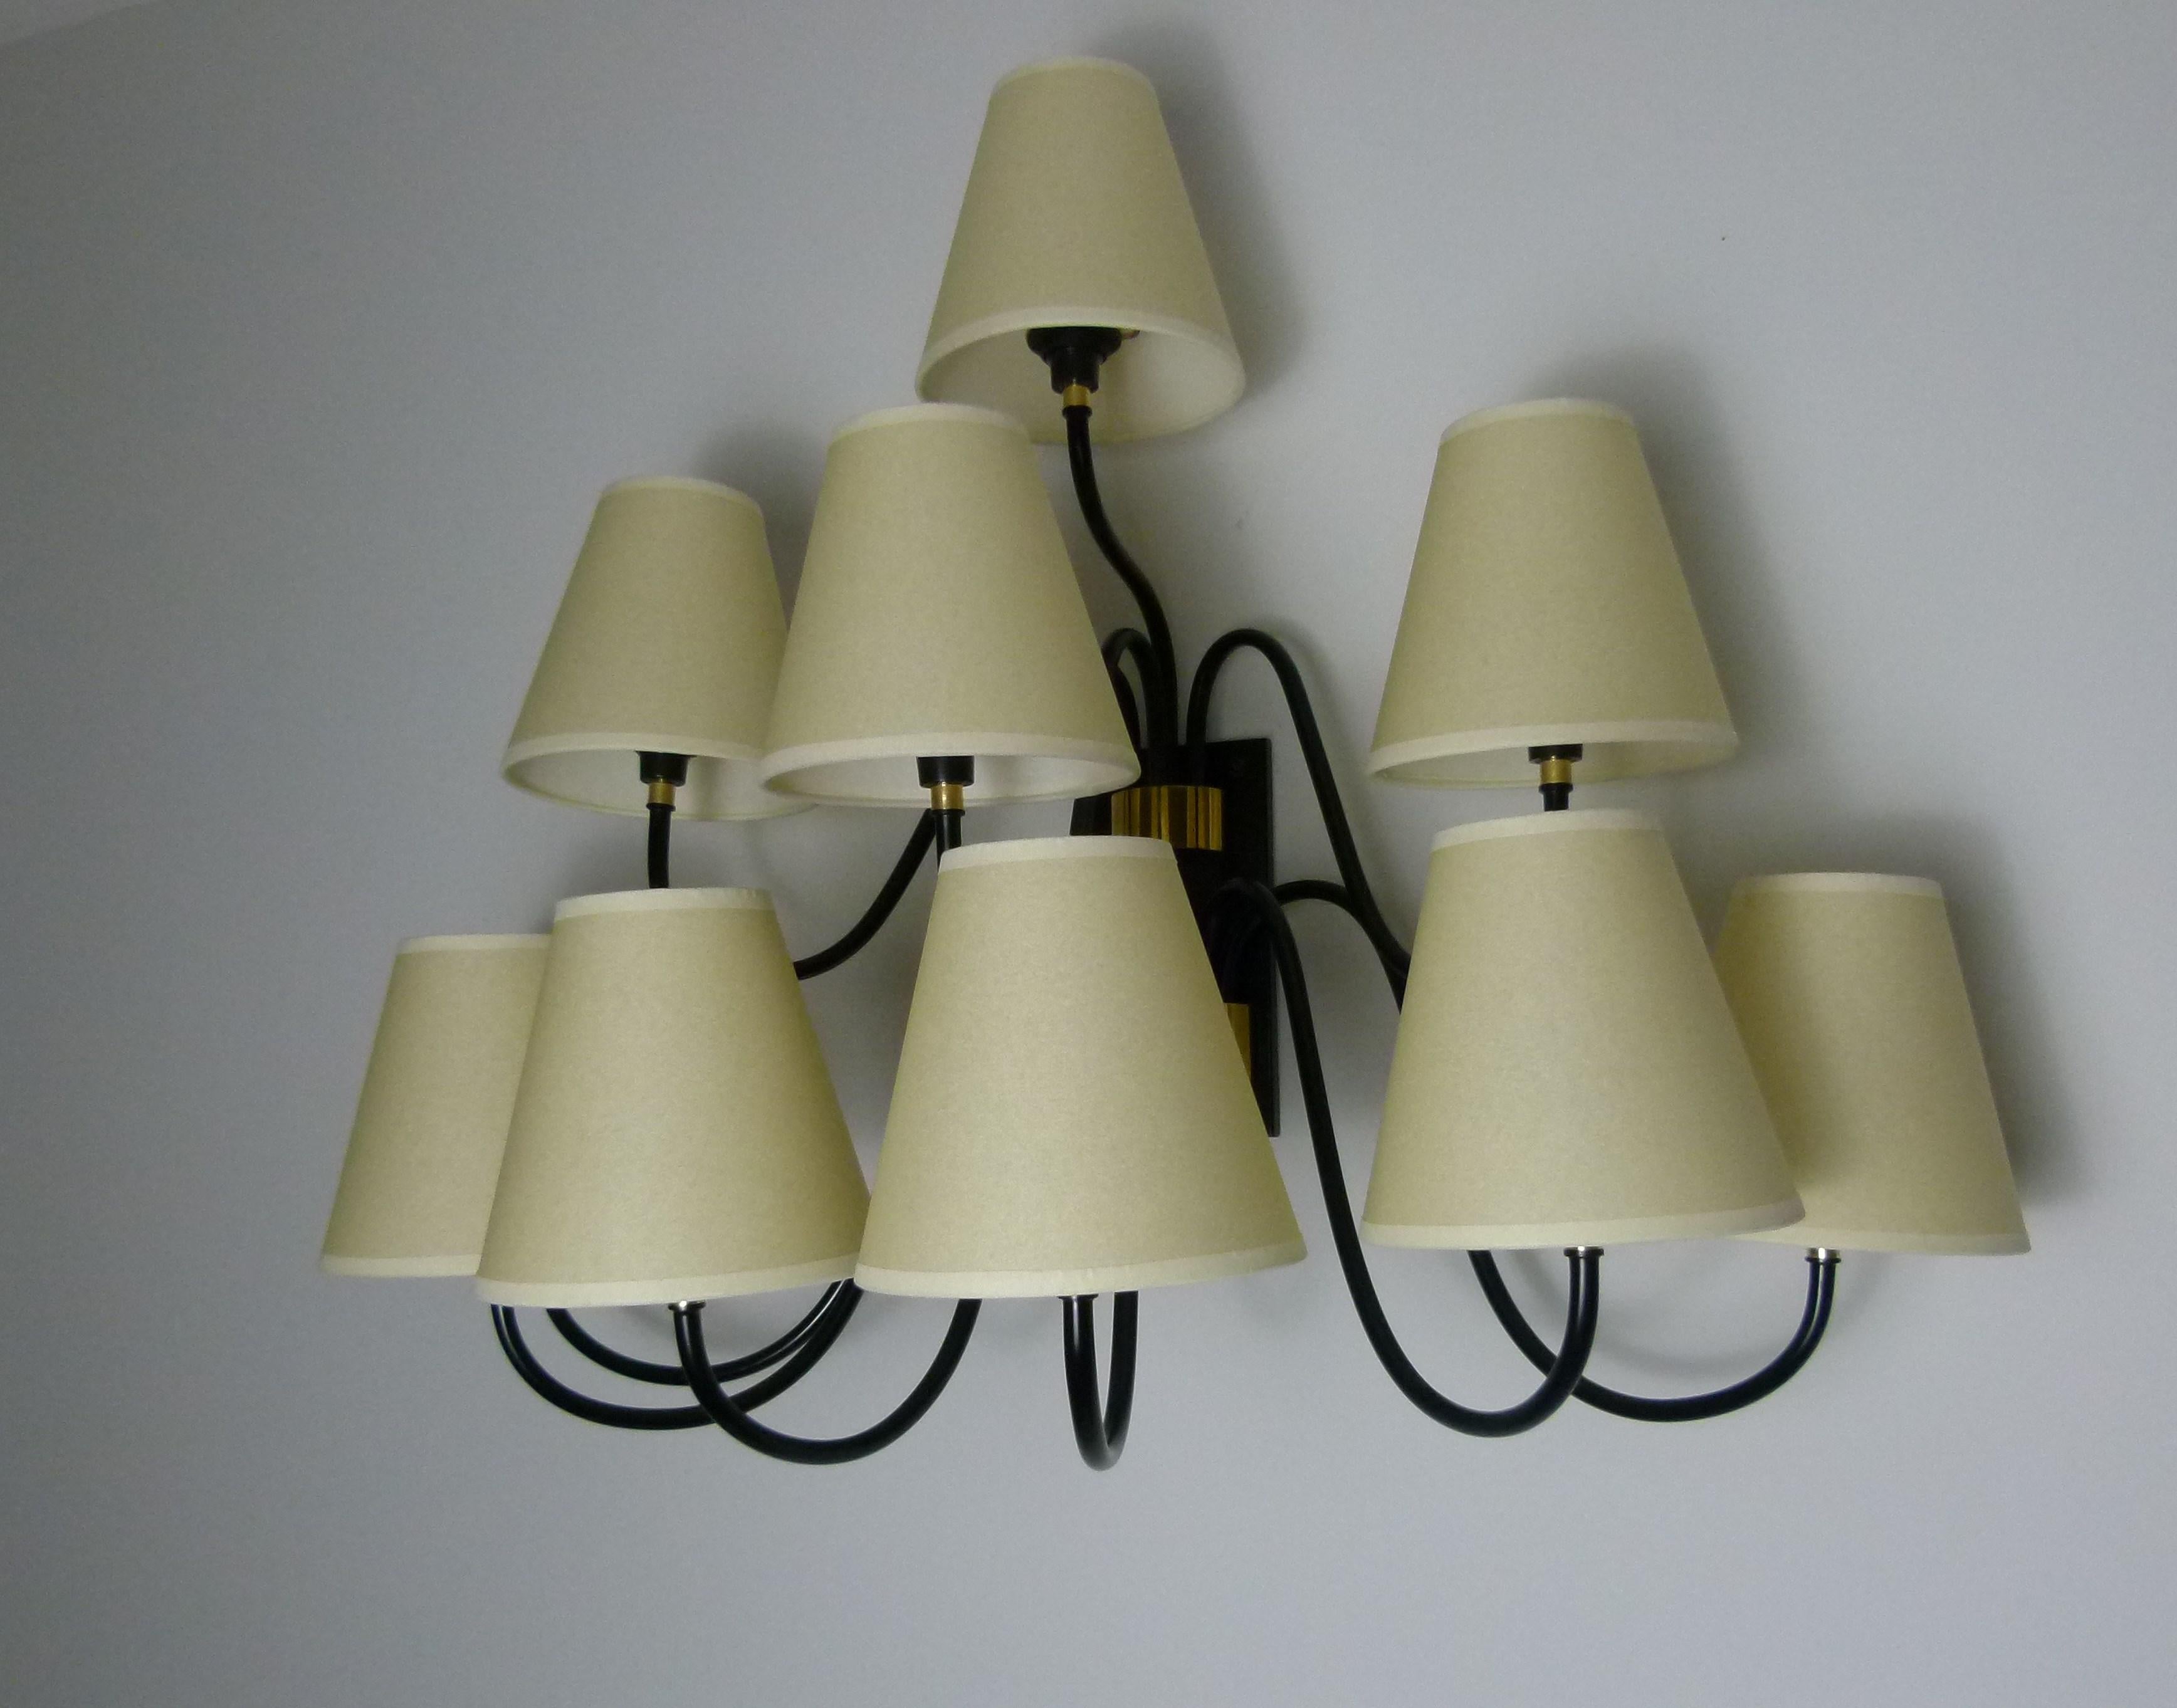 Large wall sconce with 10 arms of light consisting of a rectangular base in black lacquered metal.
A set of four black lacquered metal sconces completed by conical lampshades are fixed on a brass support, and a second set consisting of 6 light beams